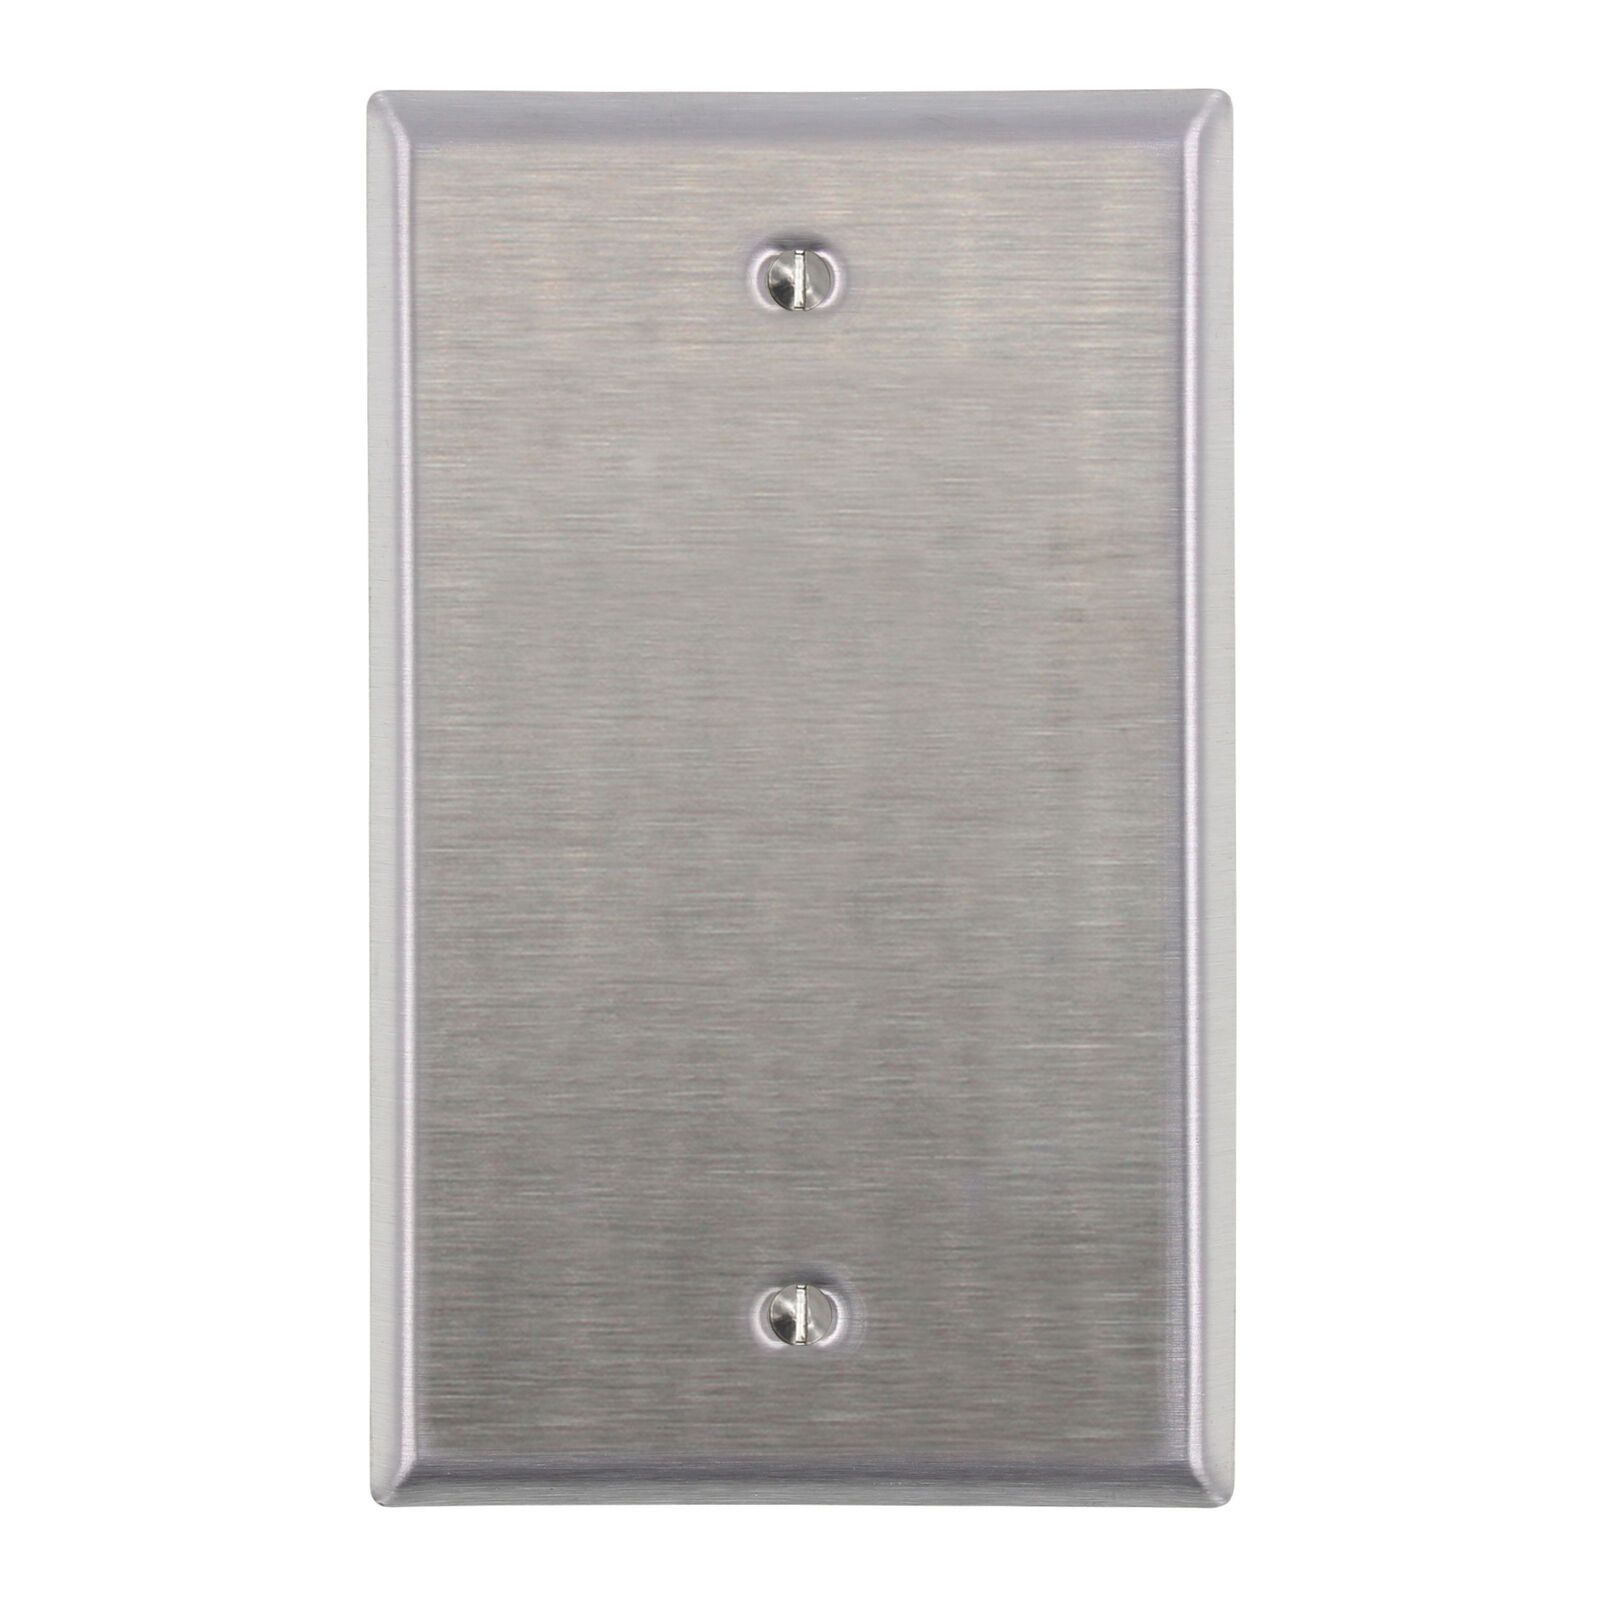 LEVITON 84014-40 1-GANG NO DEVICE BLANK WALLPLATE, STANDARD, STAINLESS STEEL